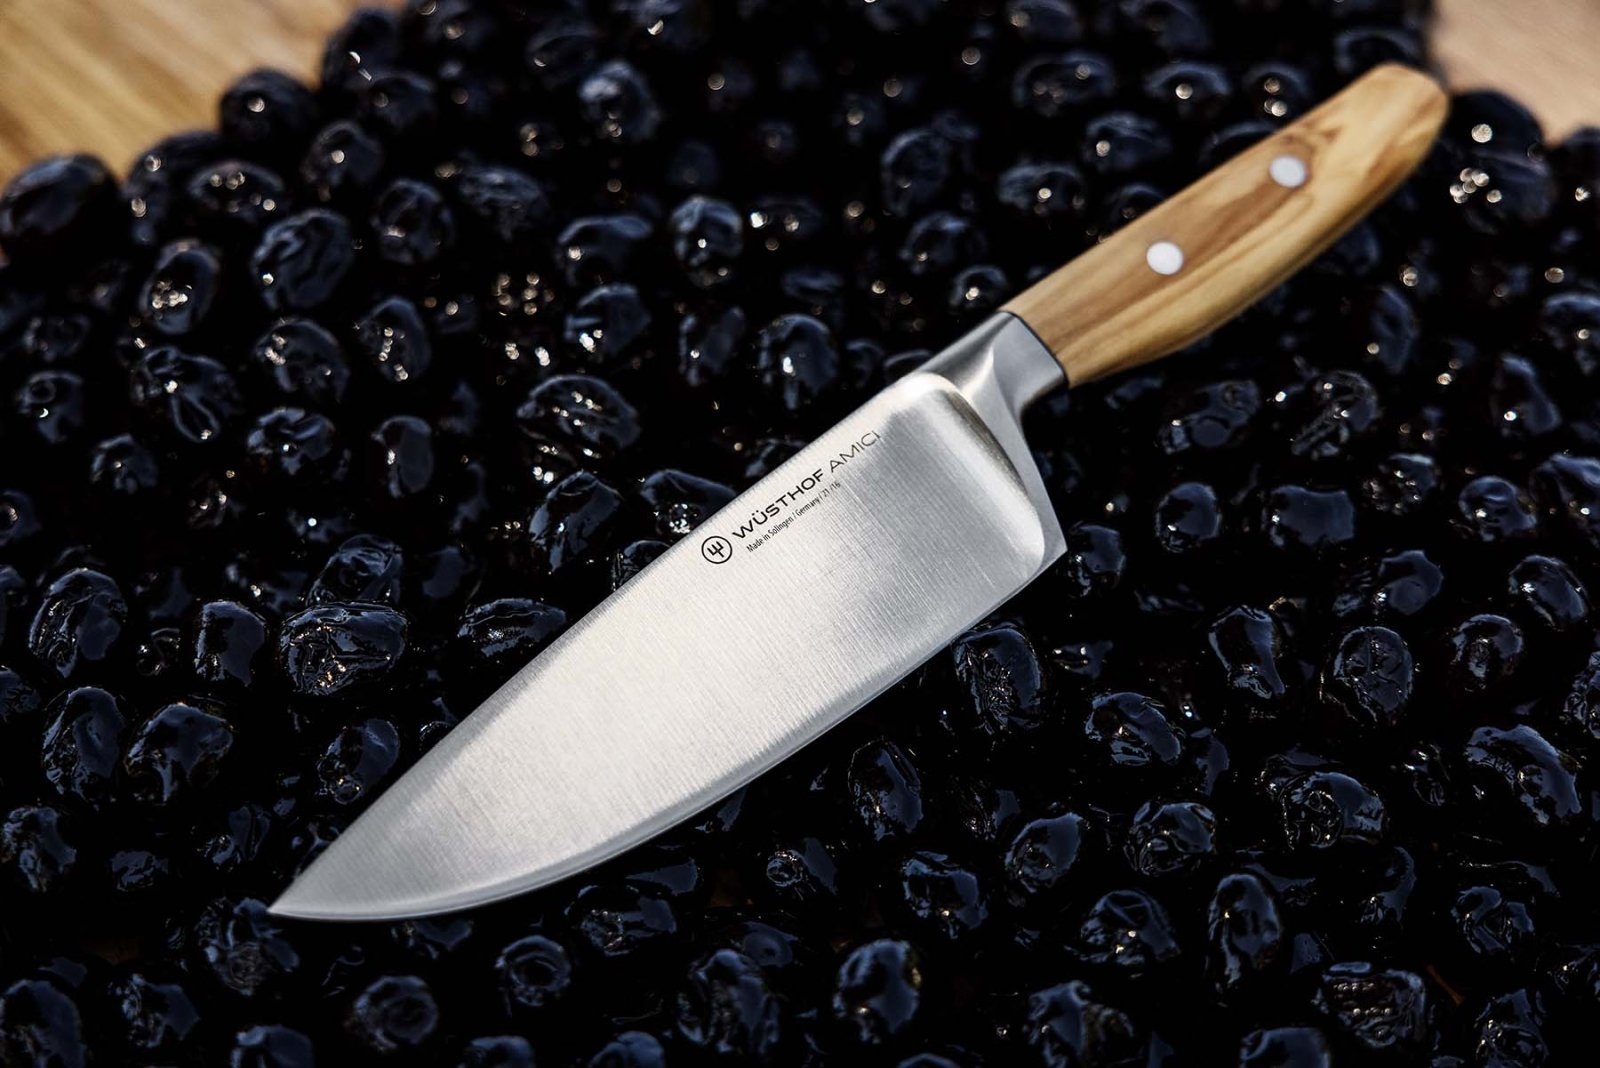 Wusthof Amici 16cm Cook's Knife - WT1011300116 - The Cotswold Knife Company